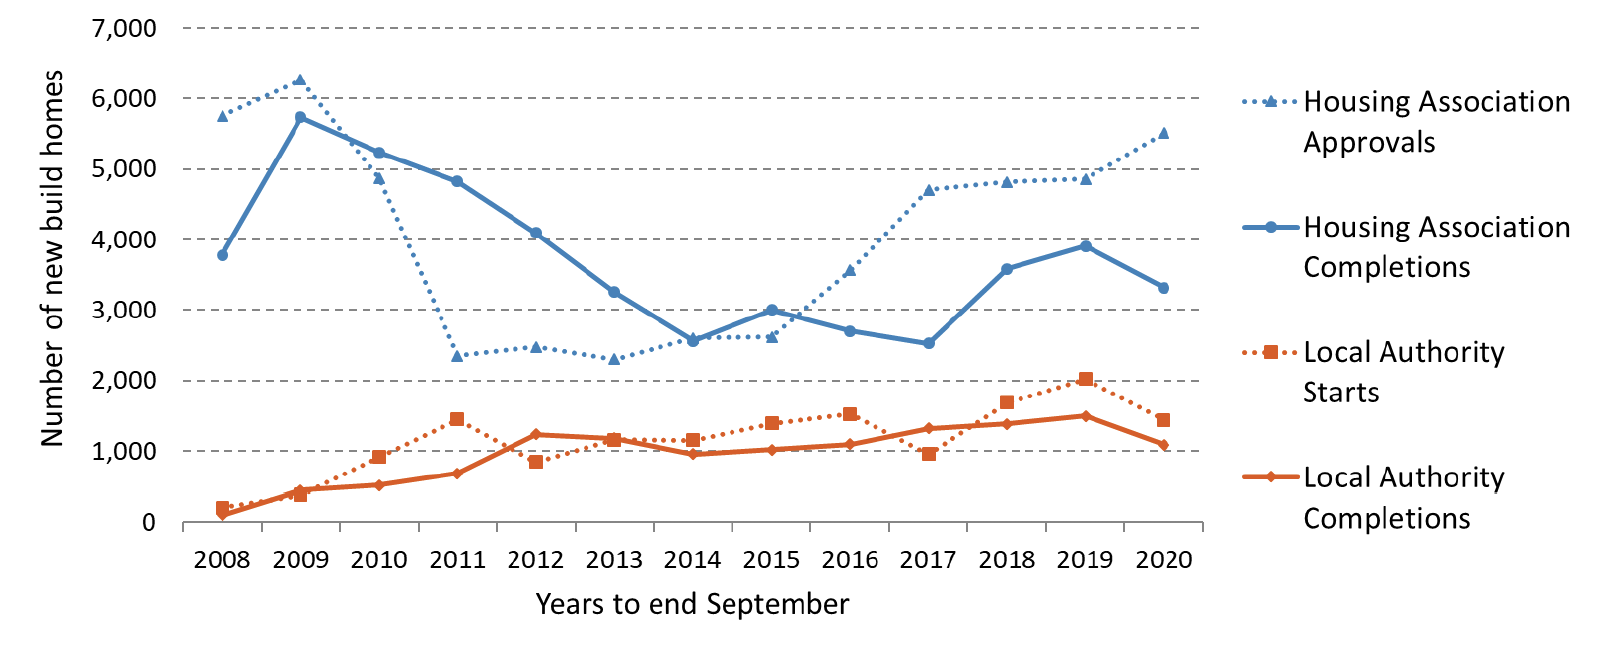 Annual Housing Association and Local Authority new build starts and completions in the years to end June from 2008 to 2020